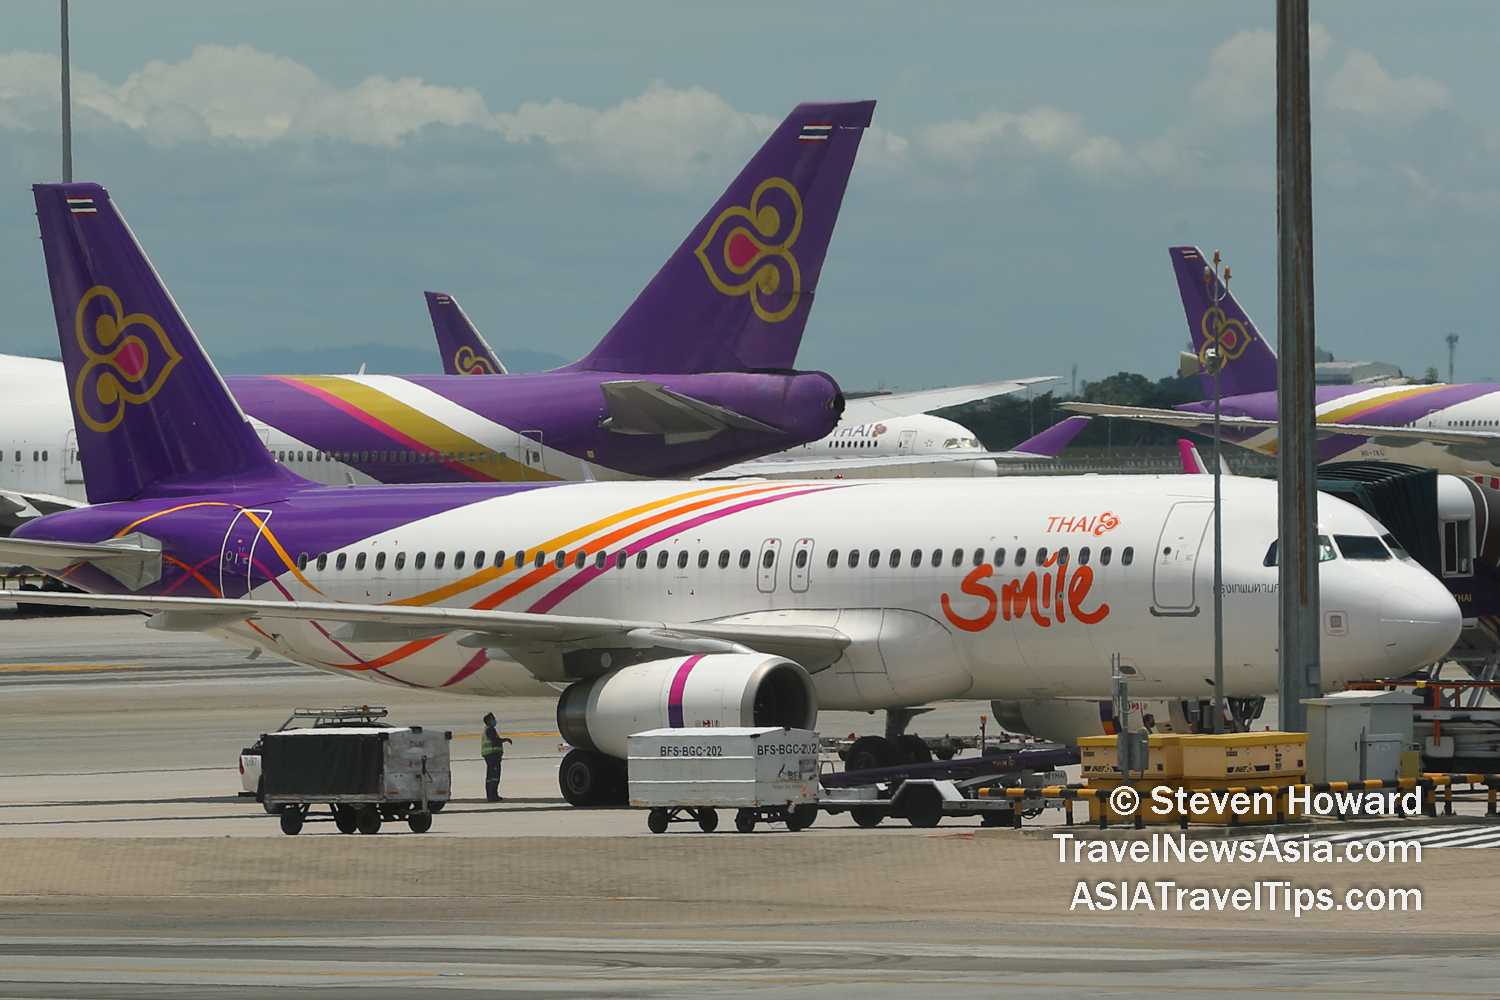 Thai Smile Aircraft at Suvarnabhumi Airport near Bangkok in August 2020. Picture by Steven Howard of TravelNewsAsia.com Click to enlarge.